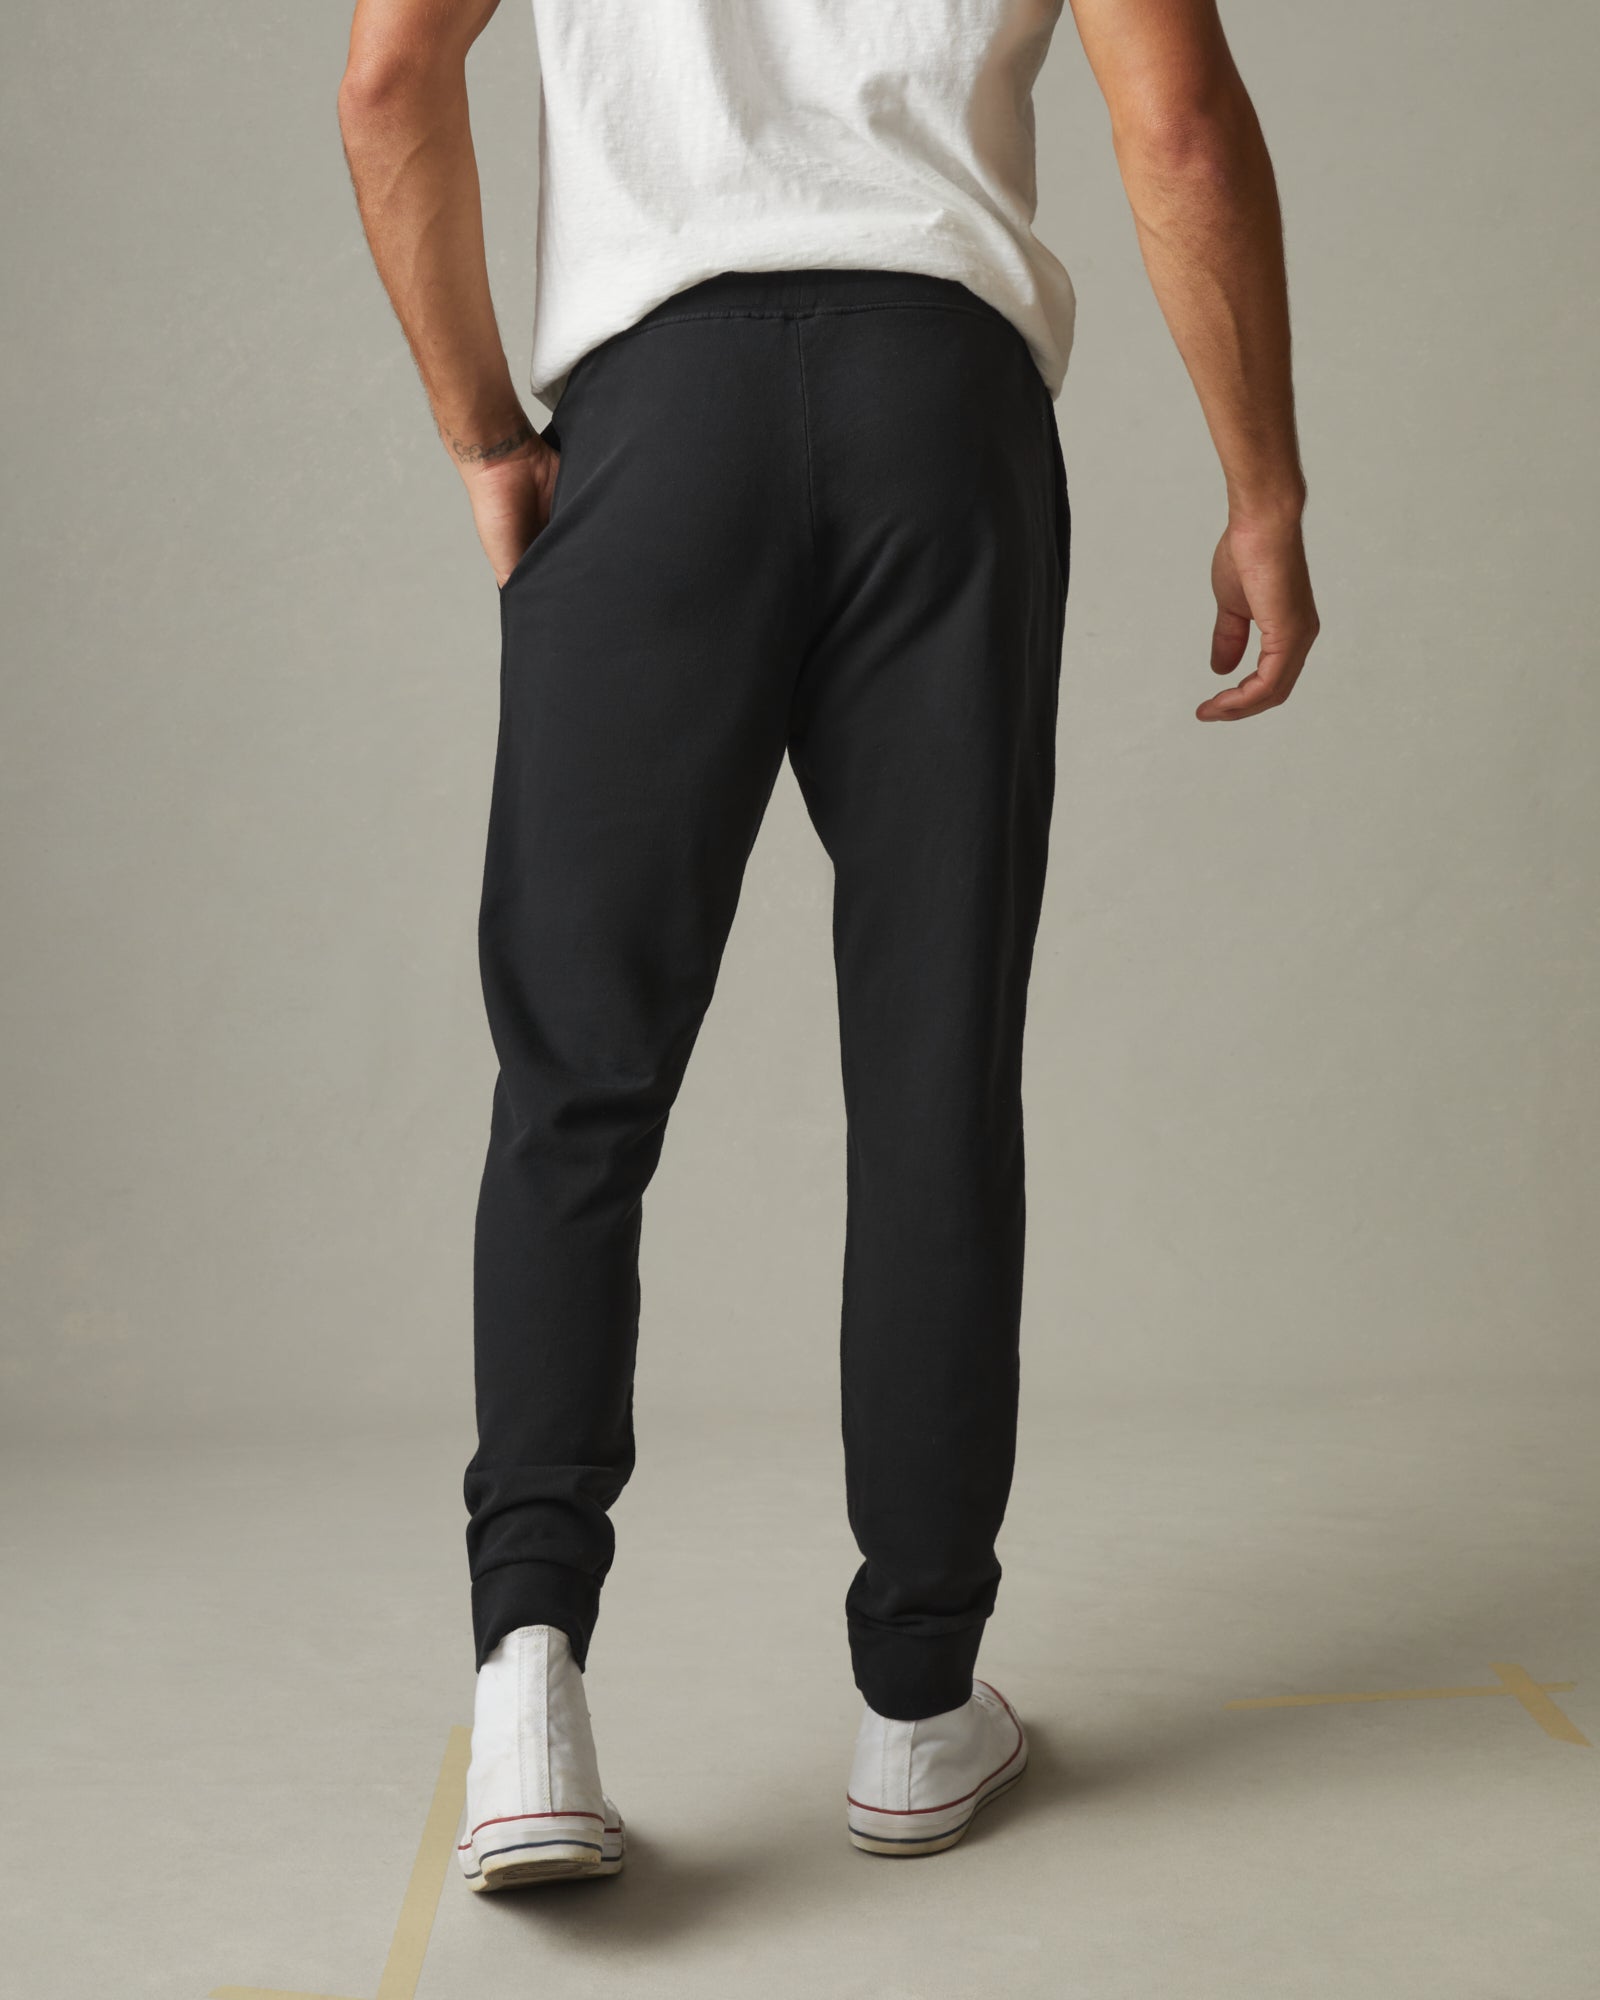 Go-Dry French Terry Pants for Men